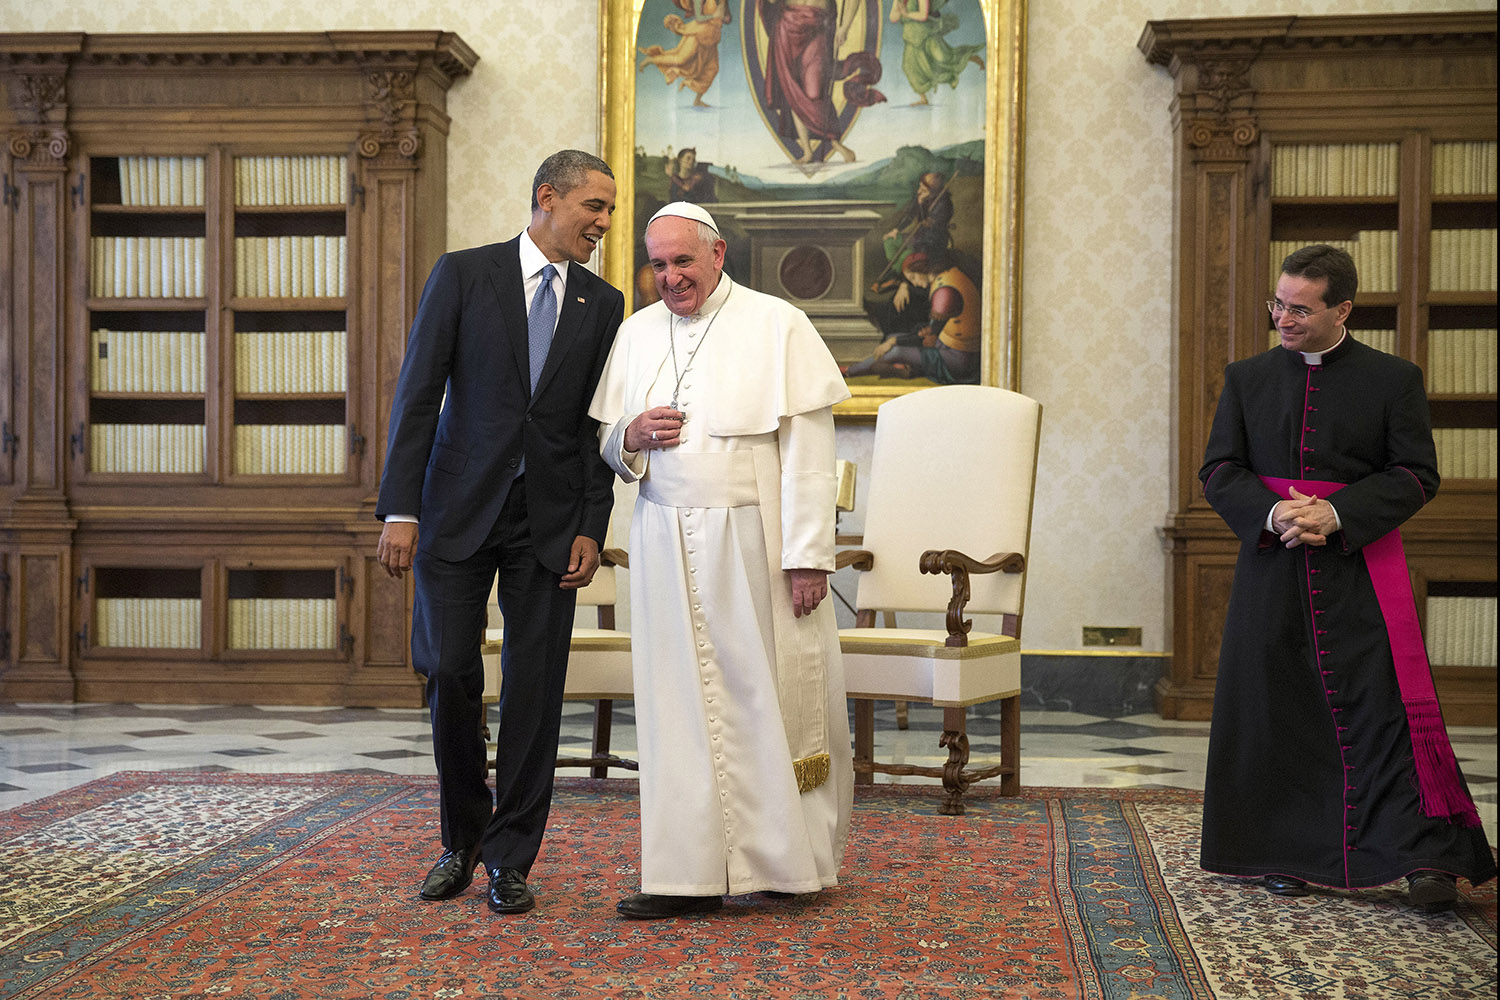 Mar. 27, 2014. President Barack Obama jokes with Pope Francis at the Vatican, Rome, Italy.